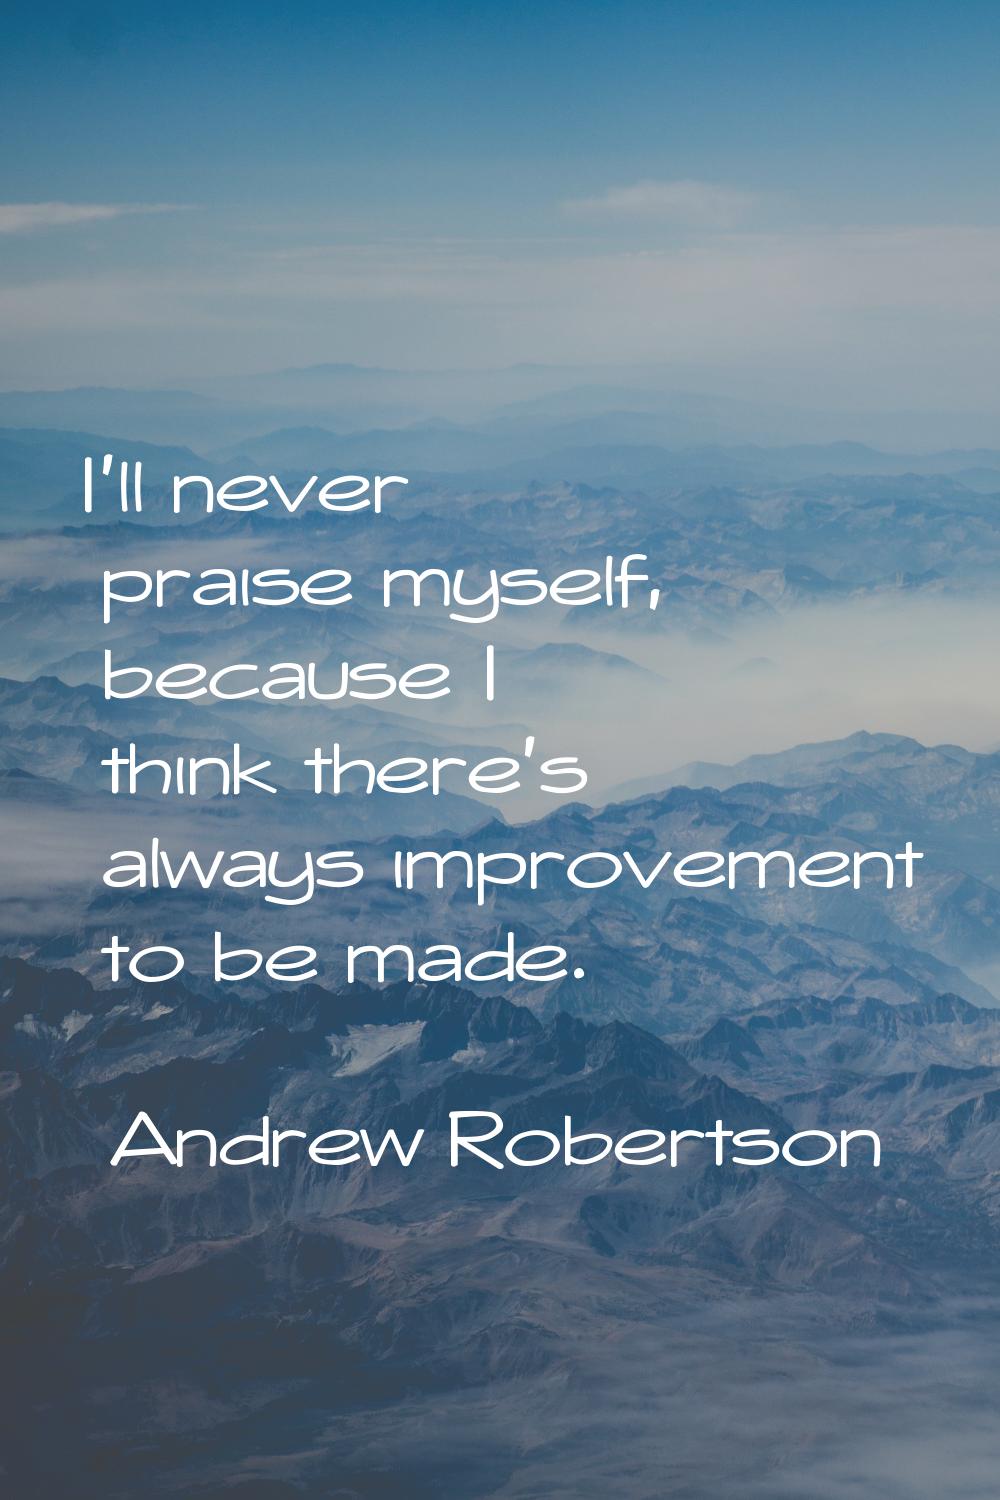 I'll never praise myself, because I think there's always improvement to be made.